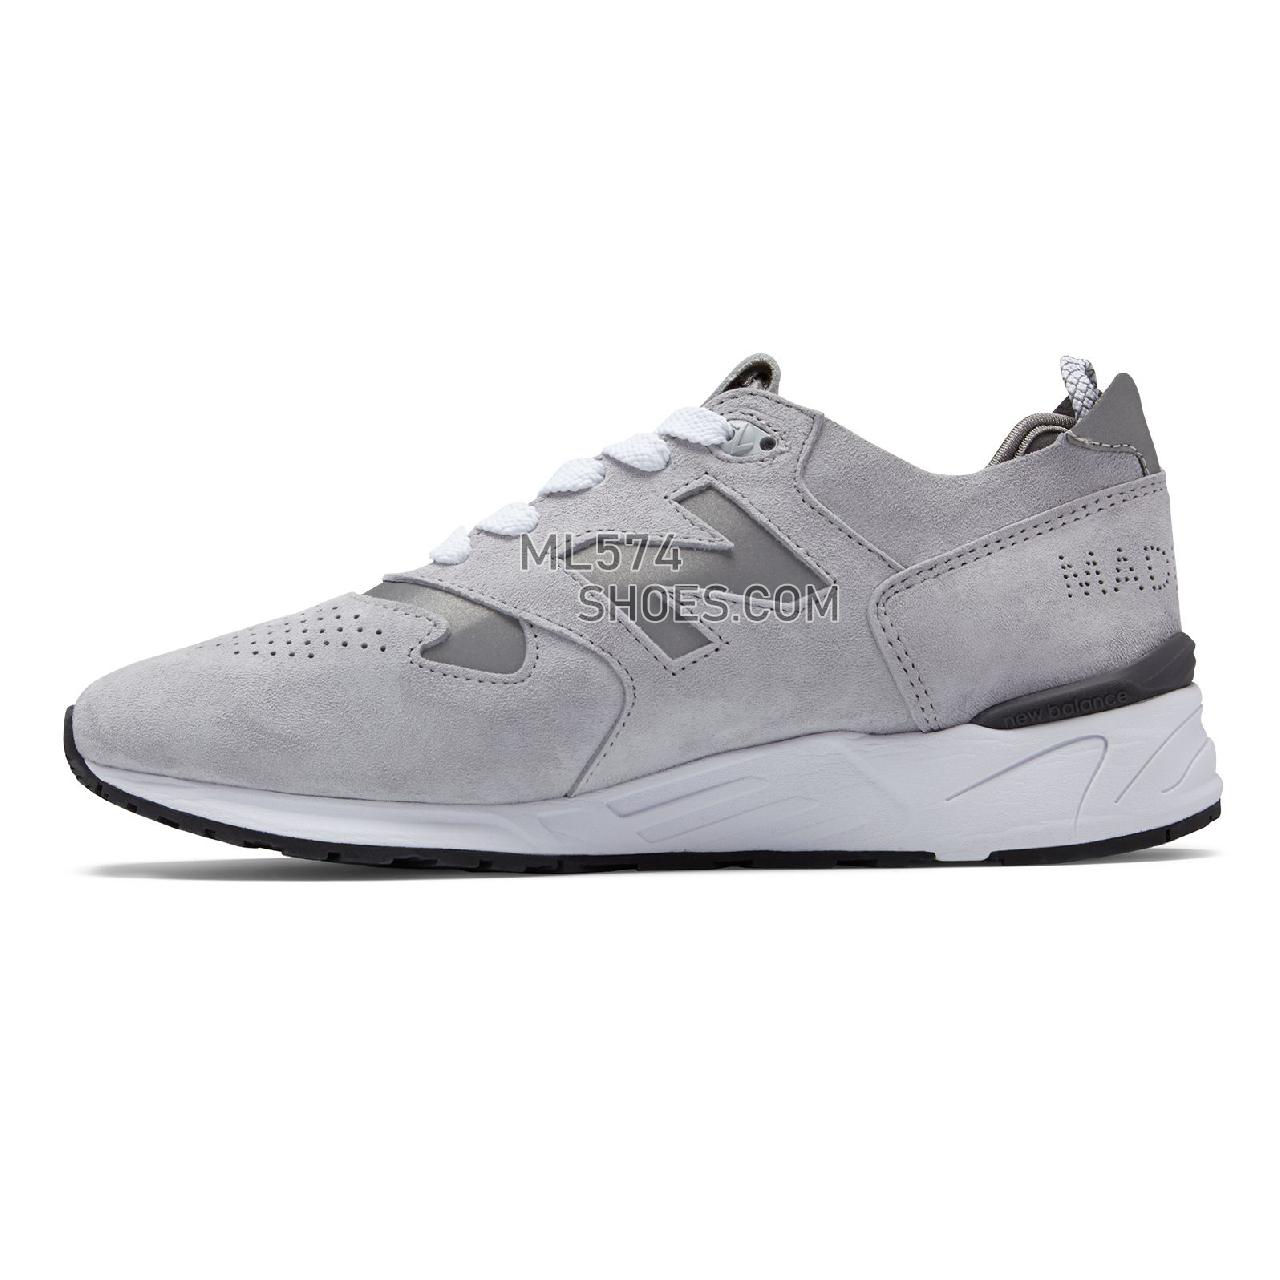 New Balance 999 Made in US - Men's 999 - Classic Grey with White - M999RTE